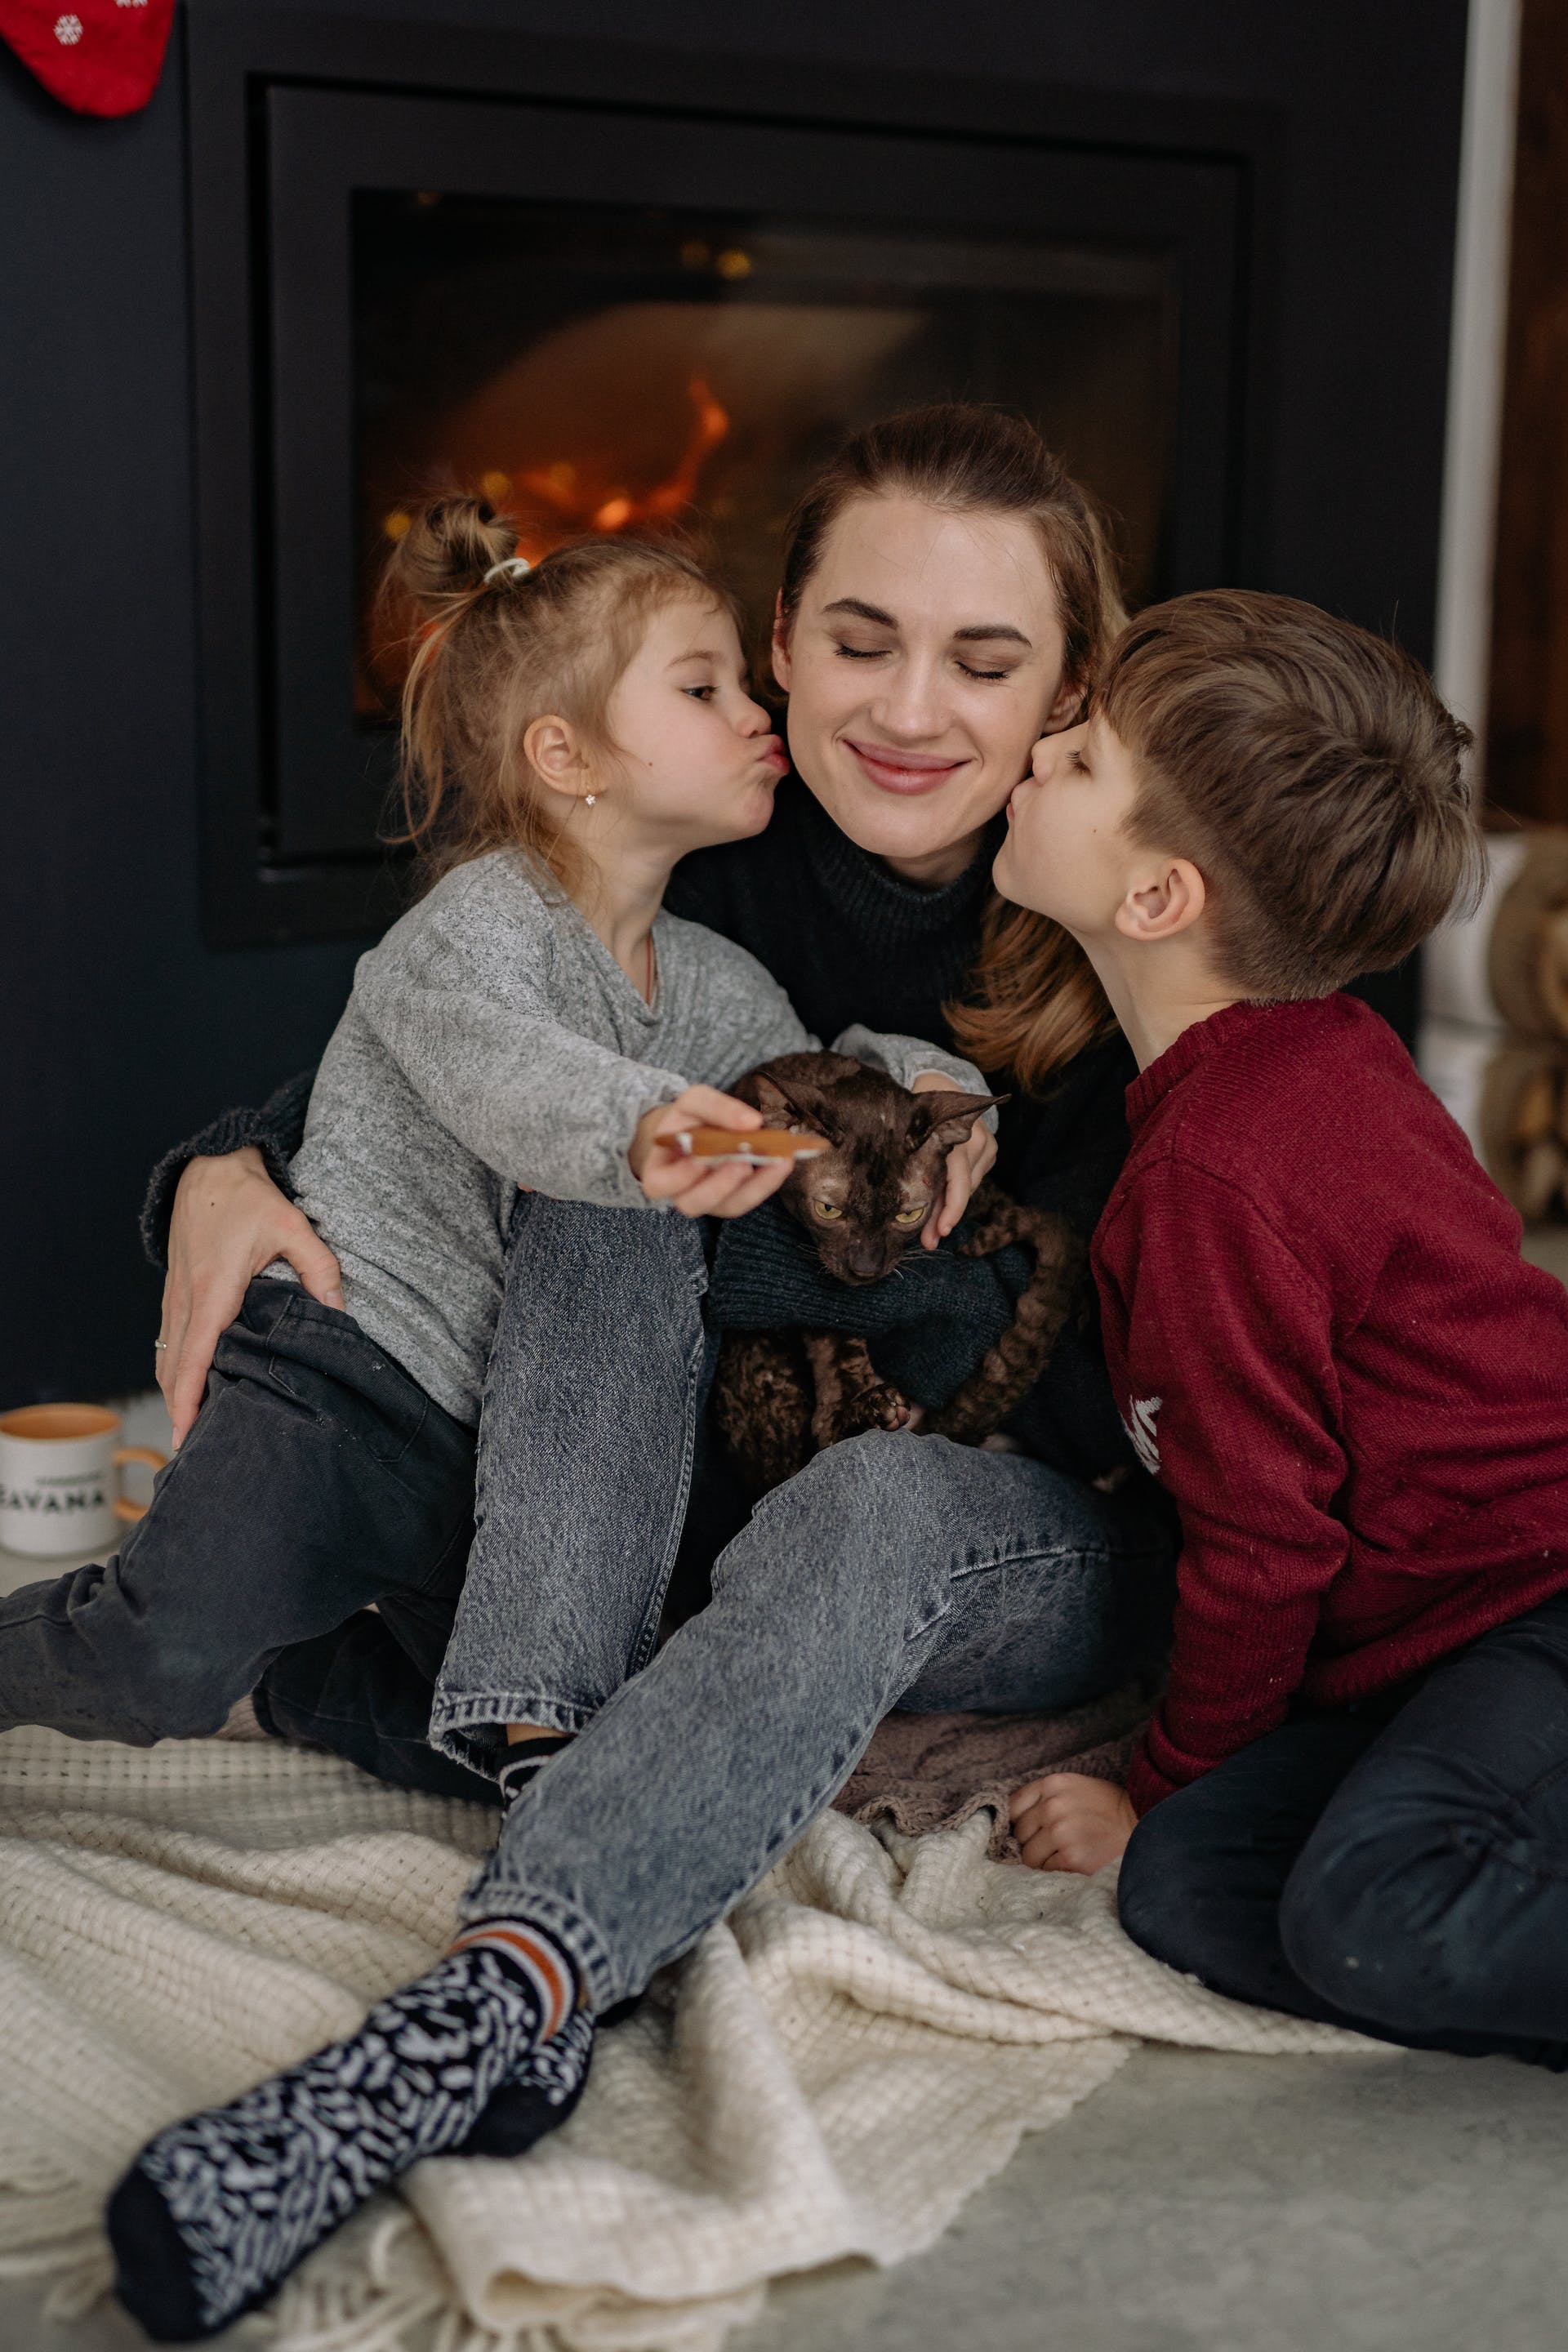 Kids kissing their mother | Source: Pexels